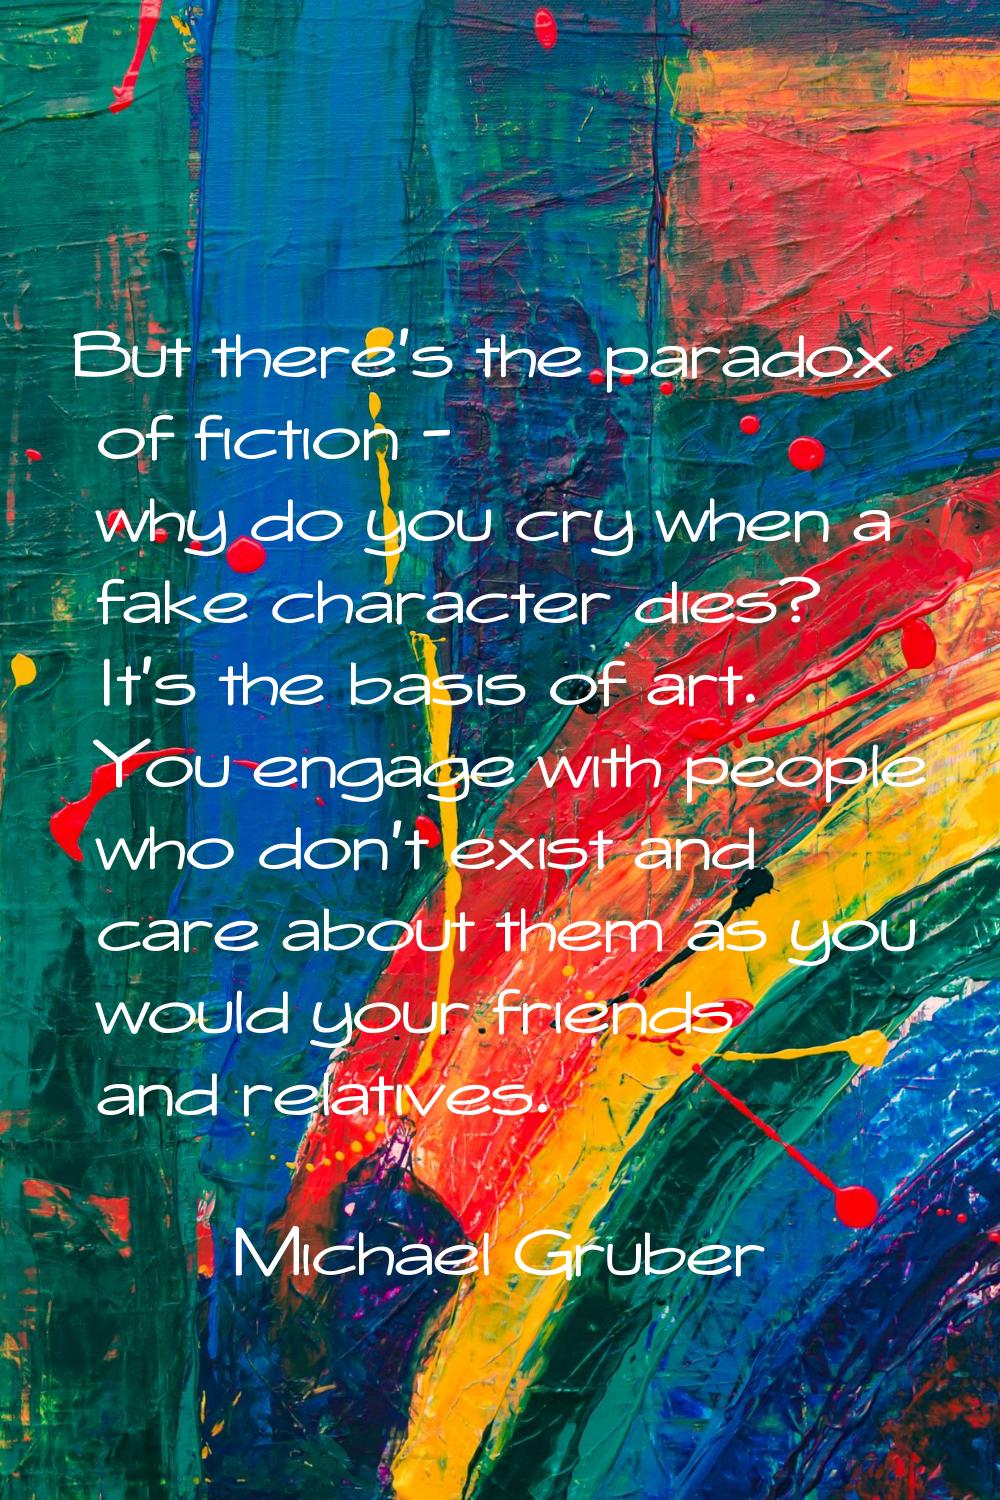 But there's the paradox of fiction - why do you cry when a fake character dies? It's the basis of a